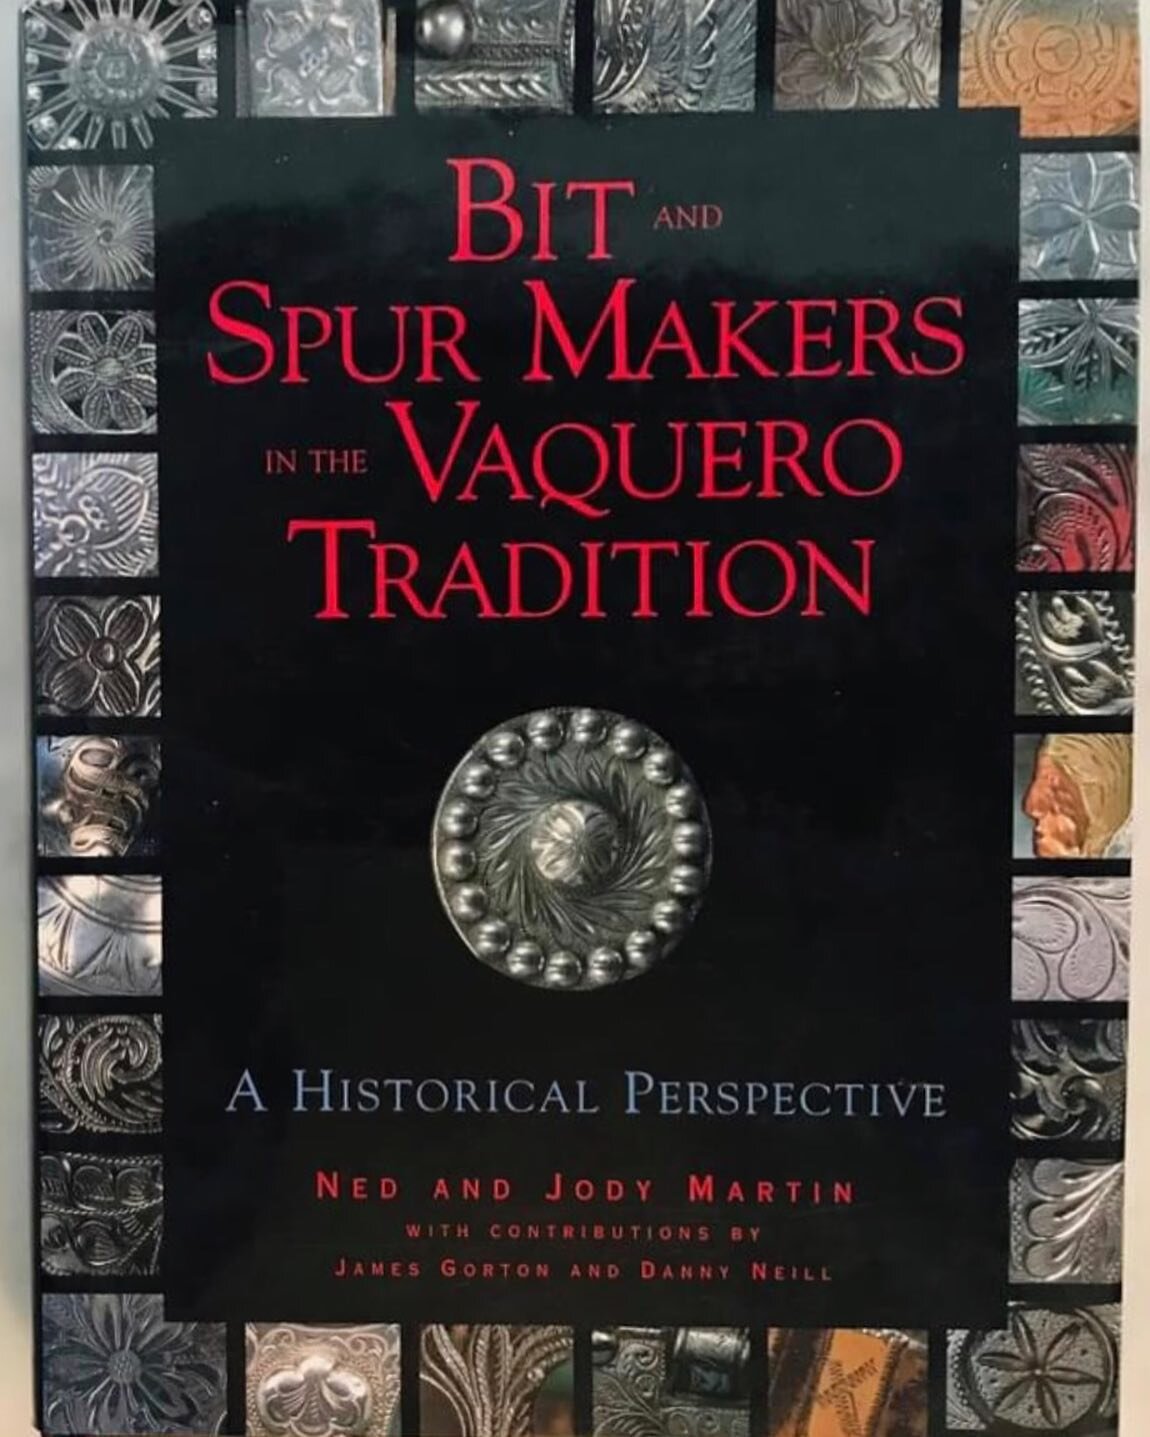 Bit and Spur Makers in the Vaquero Tradition: A historical perspective

If you love or collect California bits and spurs, this book is pretty much the bible. Hard cover with dust jacket and in very nice condition.  336 pages with over 650 color photo